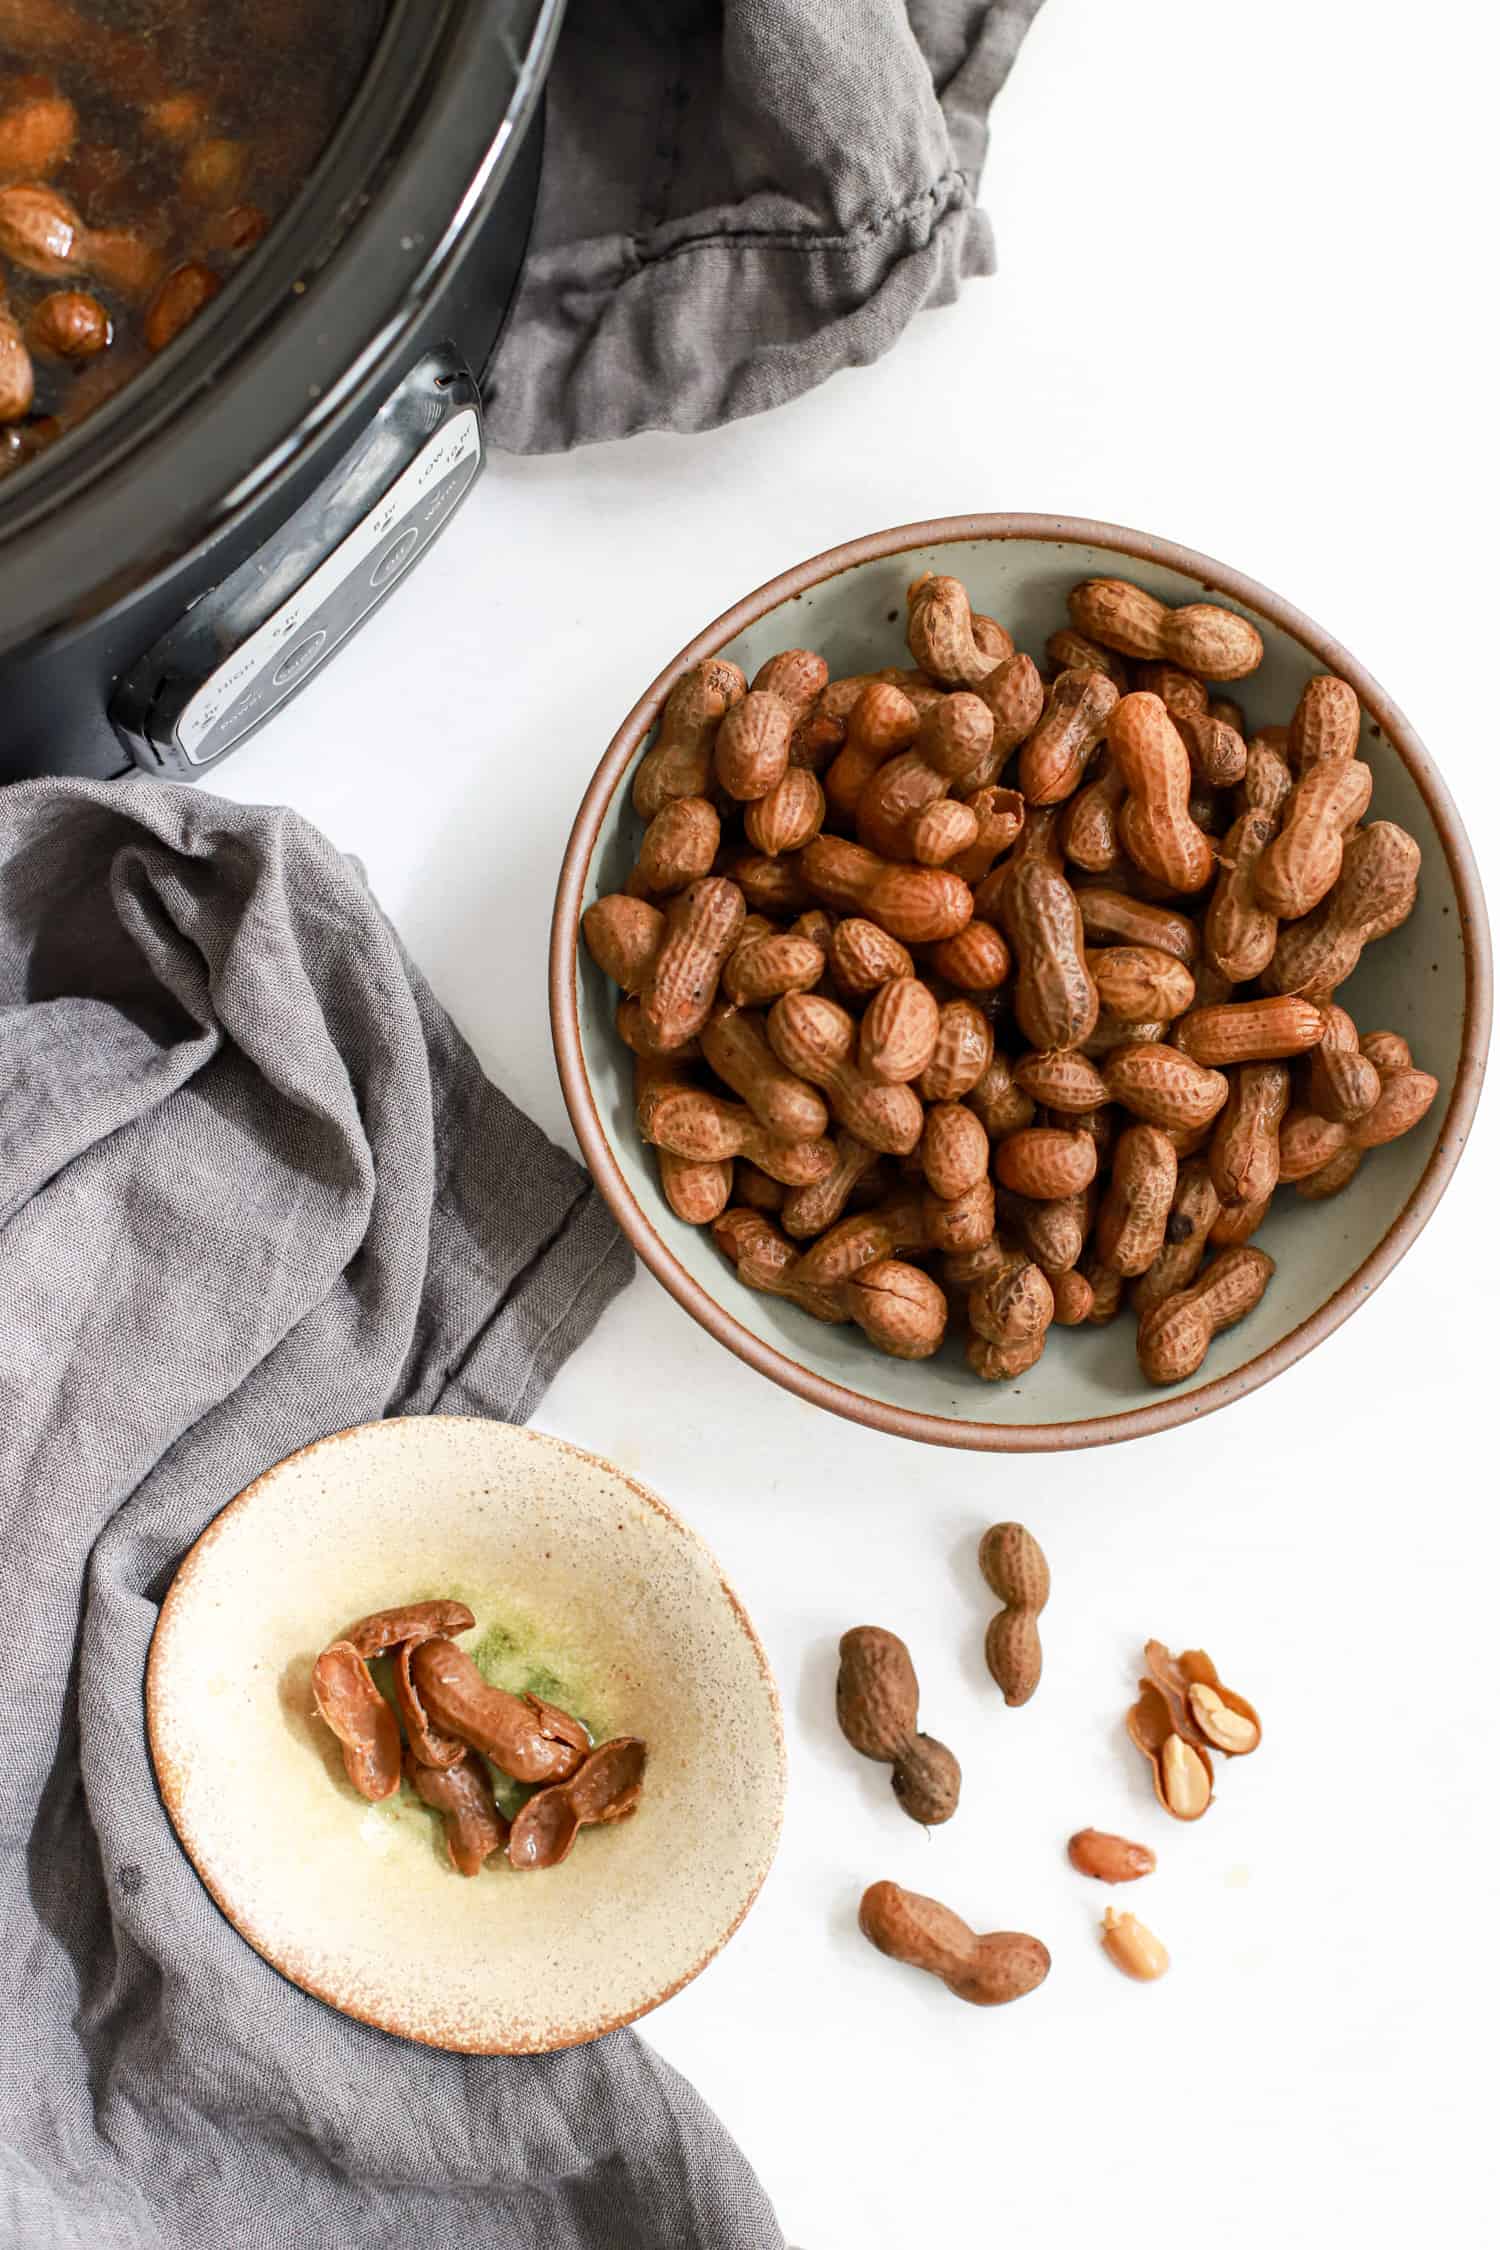 Top view of bowl of boiled peanuts with small dish for discarding shells.